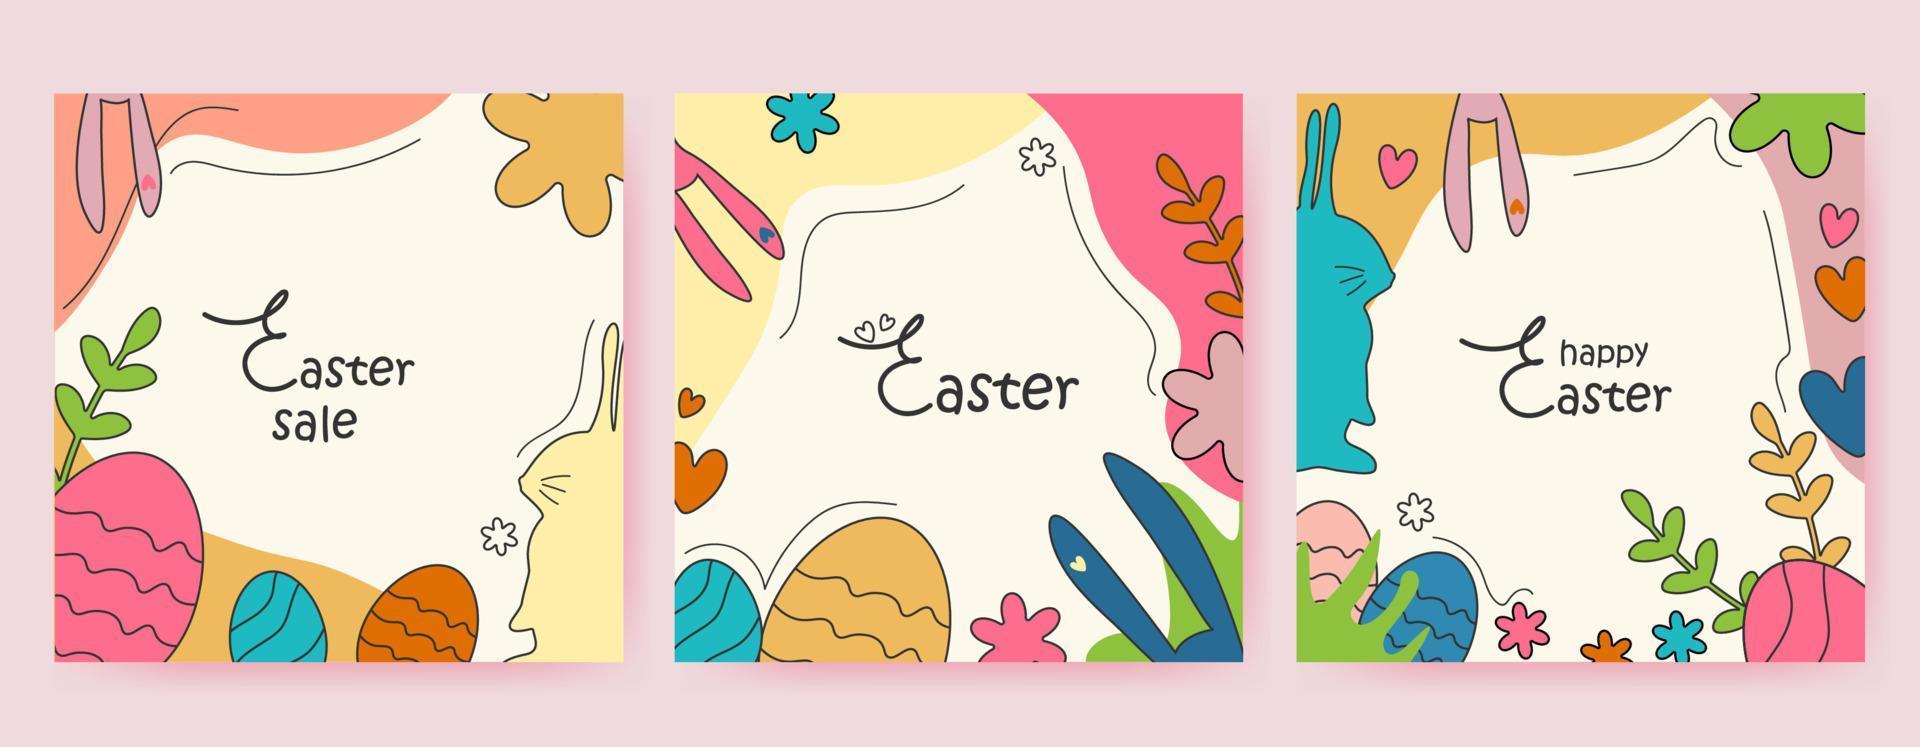 Happy Easter set of banners, greeting cards, posters, holiday covers. Trendy design with hand-painted plants, eggs and bunny ears in trendy colors. Minimalist contemporary art style. vector